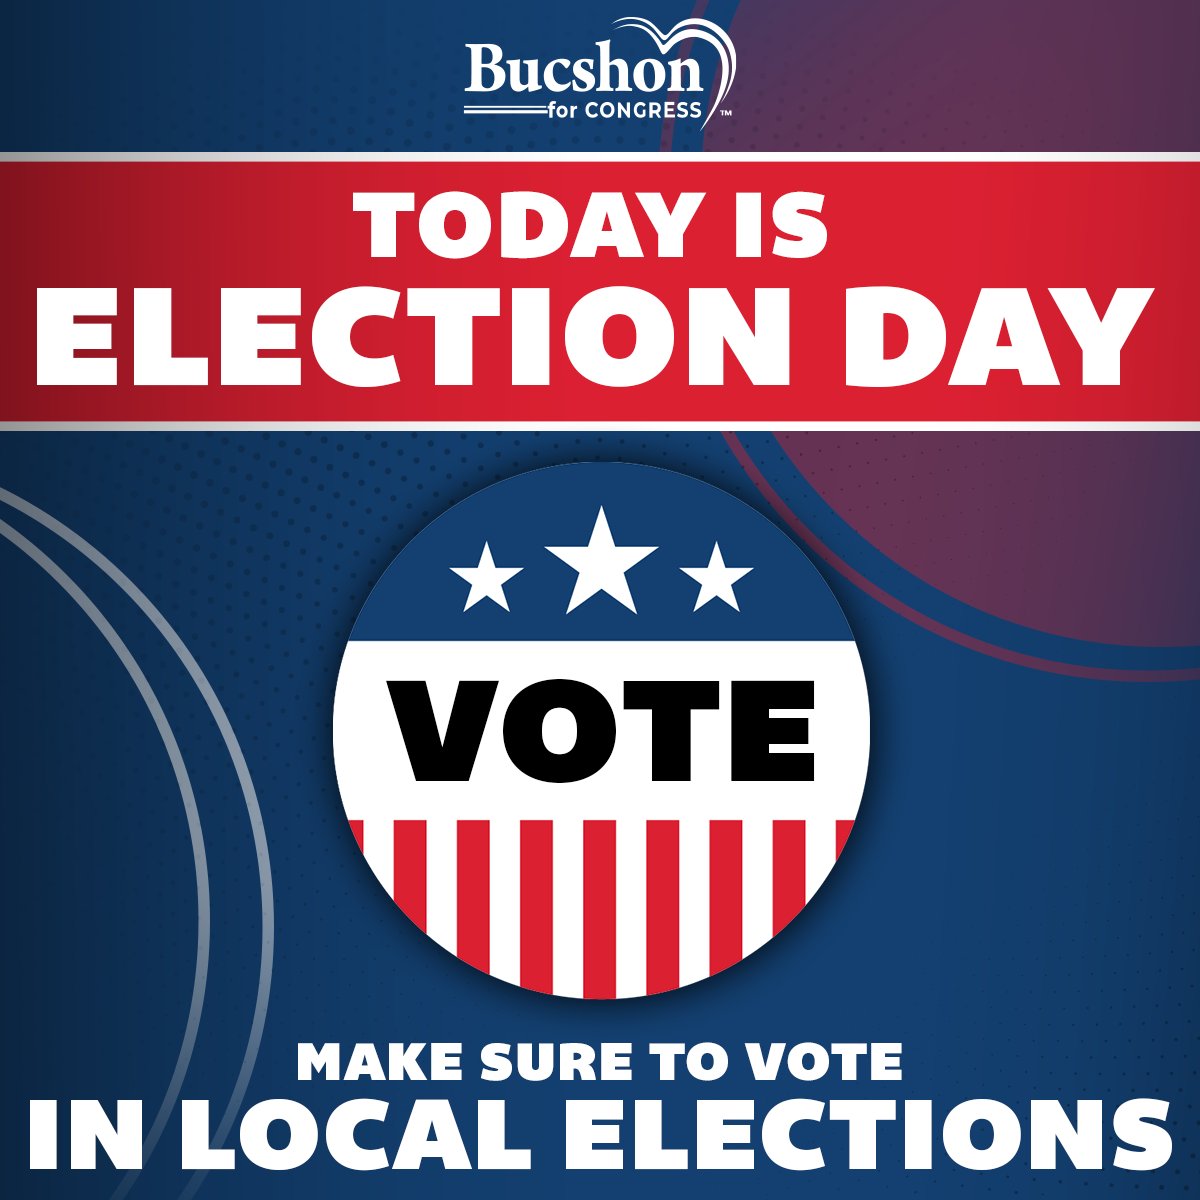 It's Election Day! Local elections decide what matters most in our communities! Vote Republican up and down the ballot for safety and opportunity!